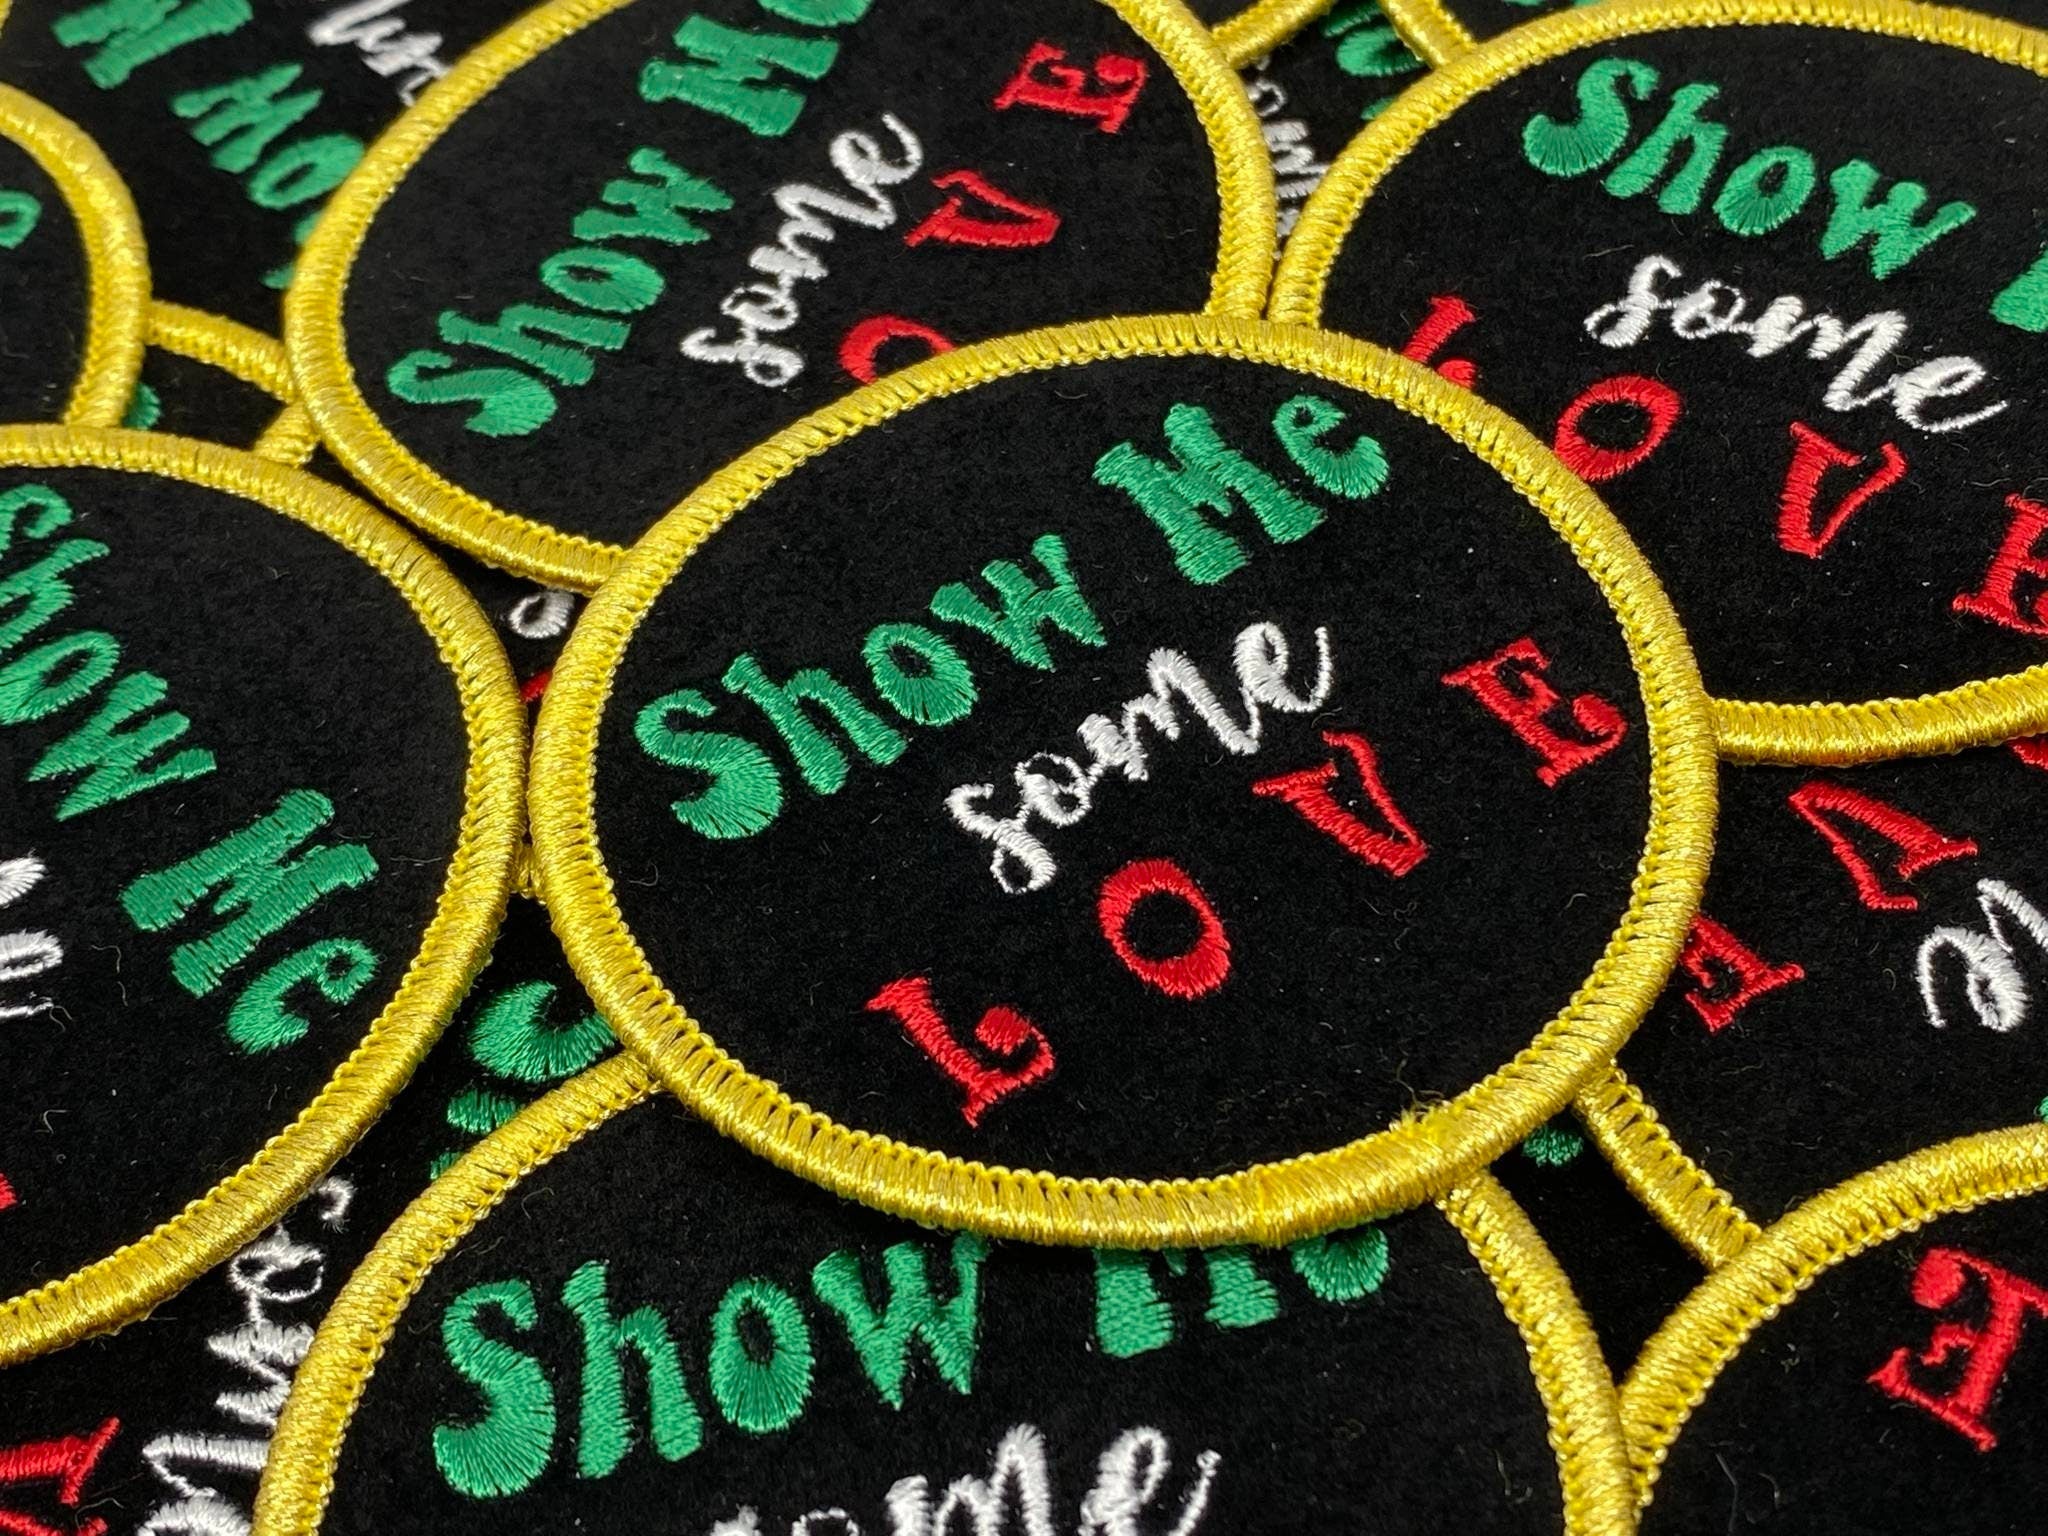 New Arrival, "Show Me Some Love, VELVET Motivational Quote Patch, 3" inch, Diy Applique, Iron-on Patch, Jacket Patch, Red/Green/Gold/Black